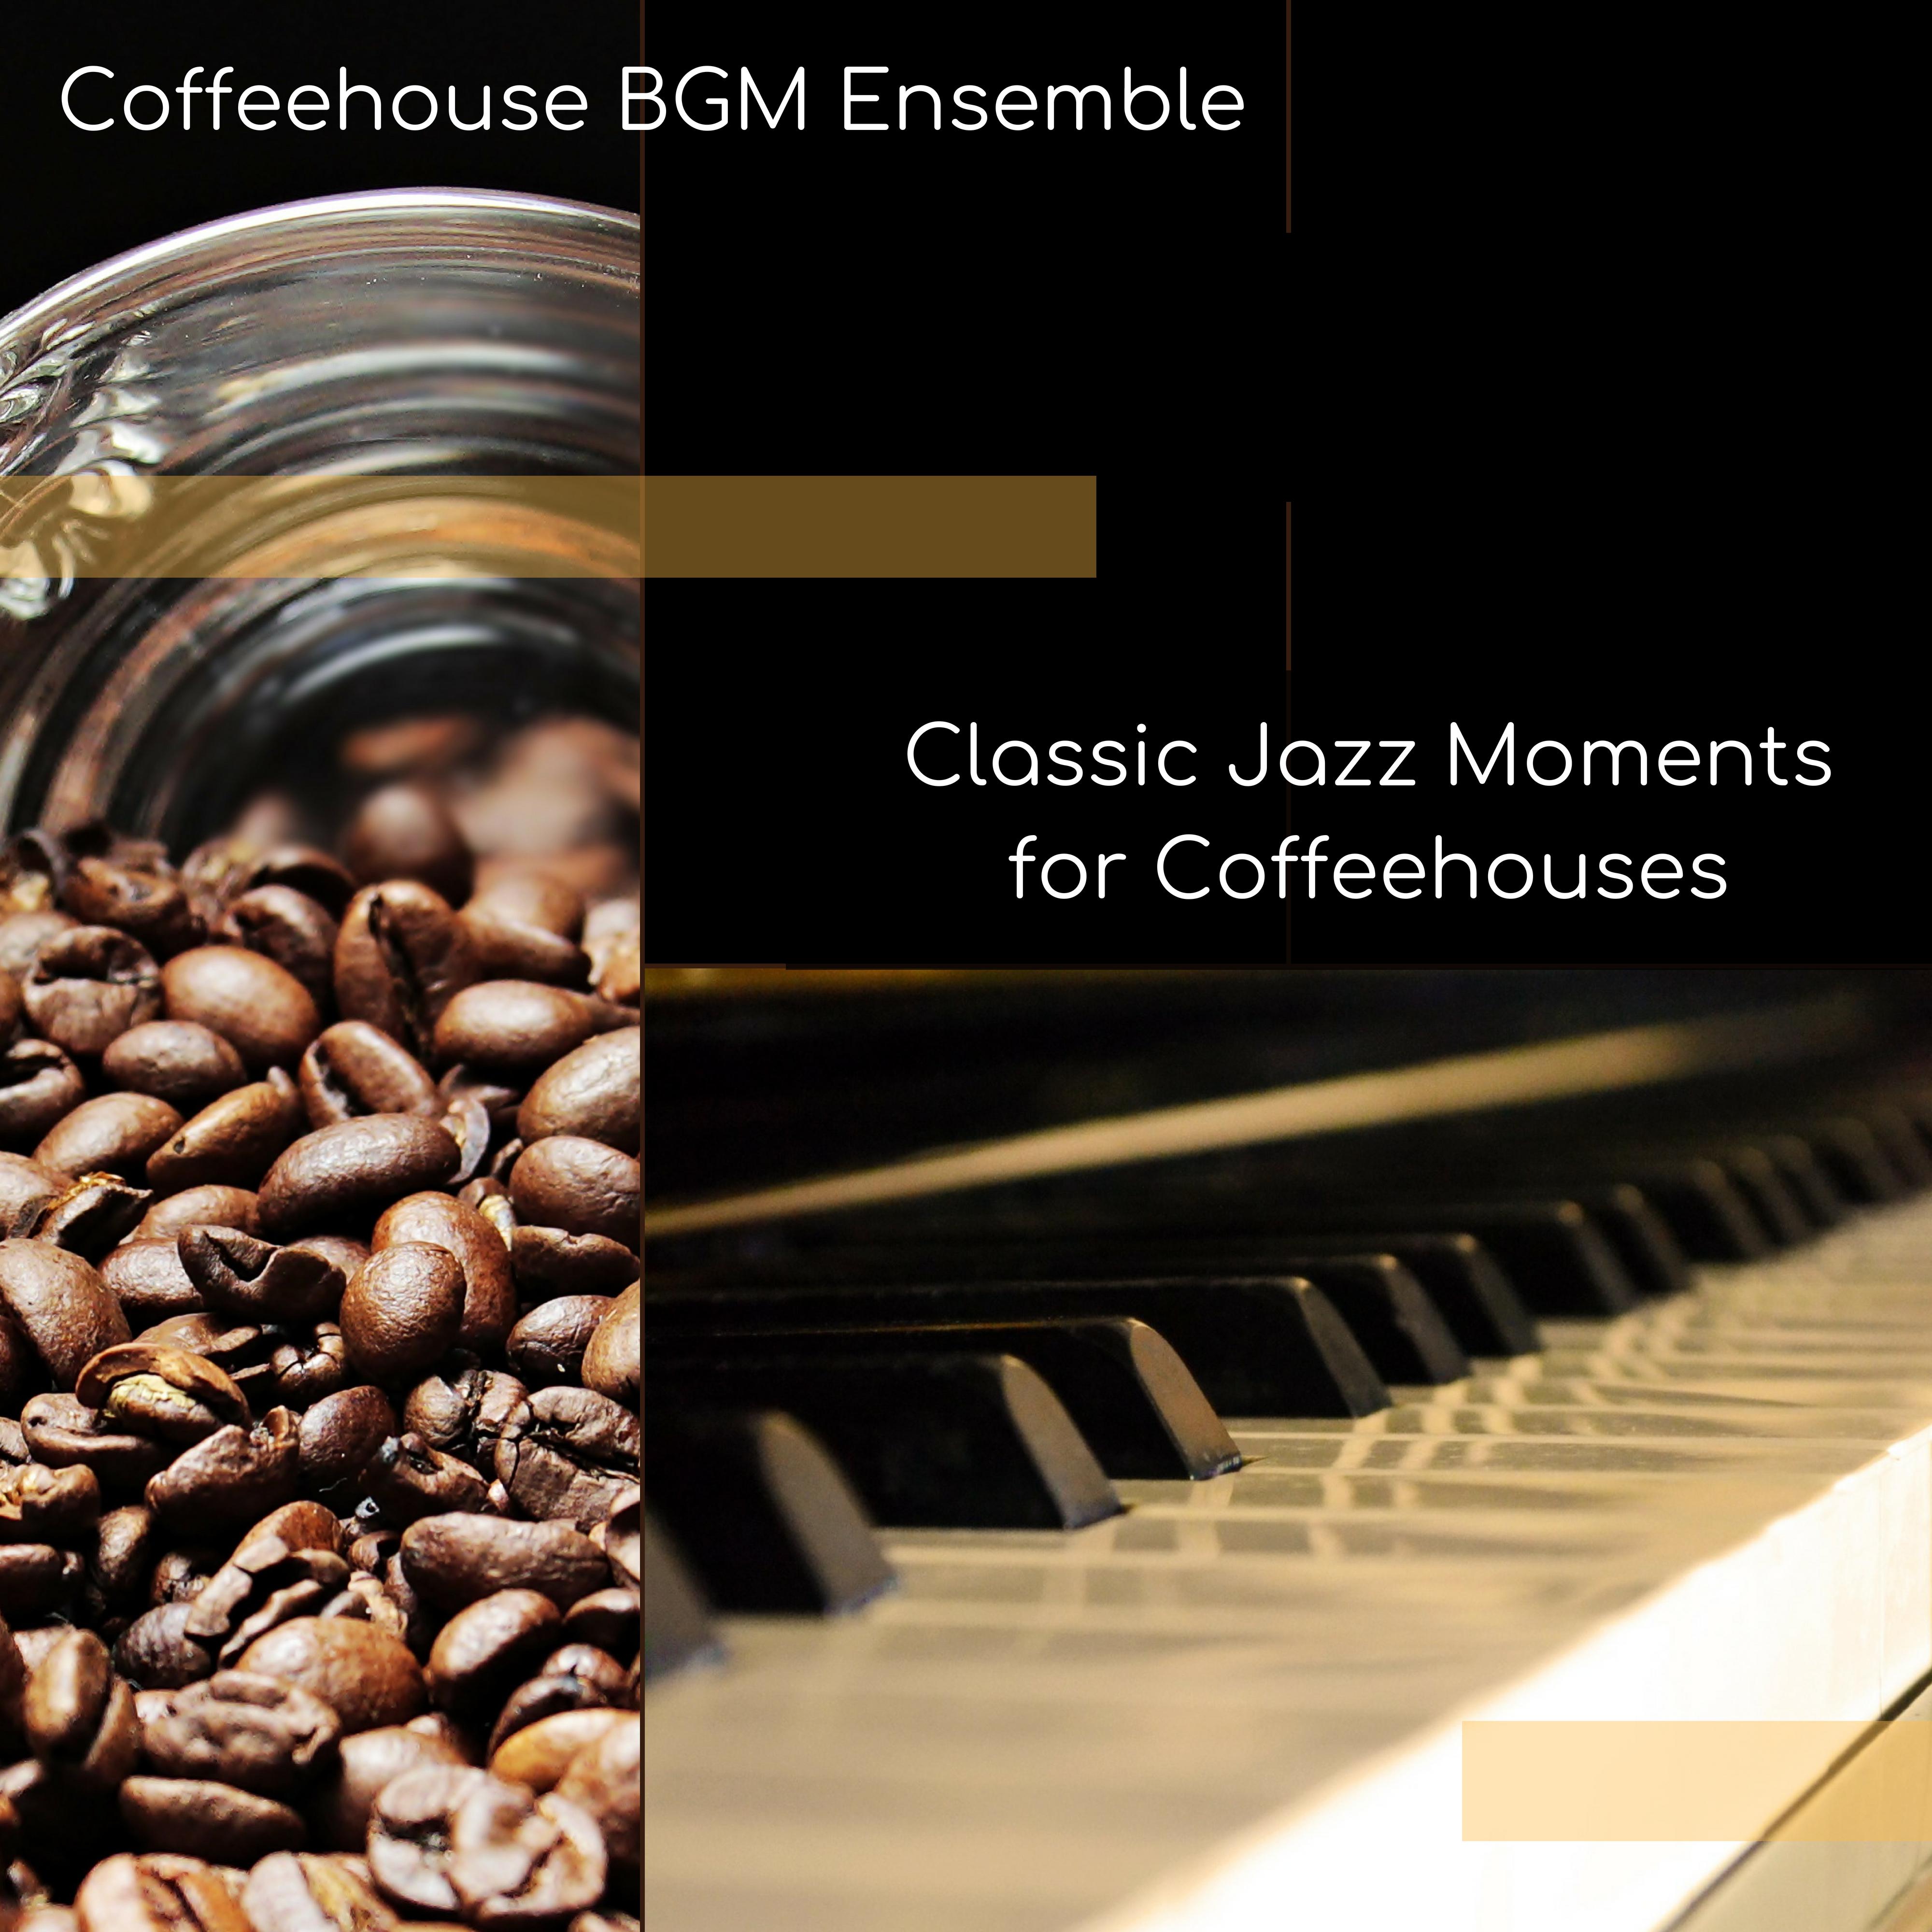 Instrumental Music for Coffee and Cake at Coffeehouses